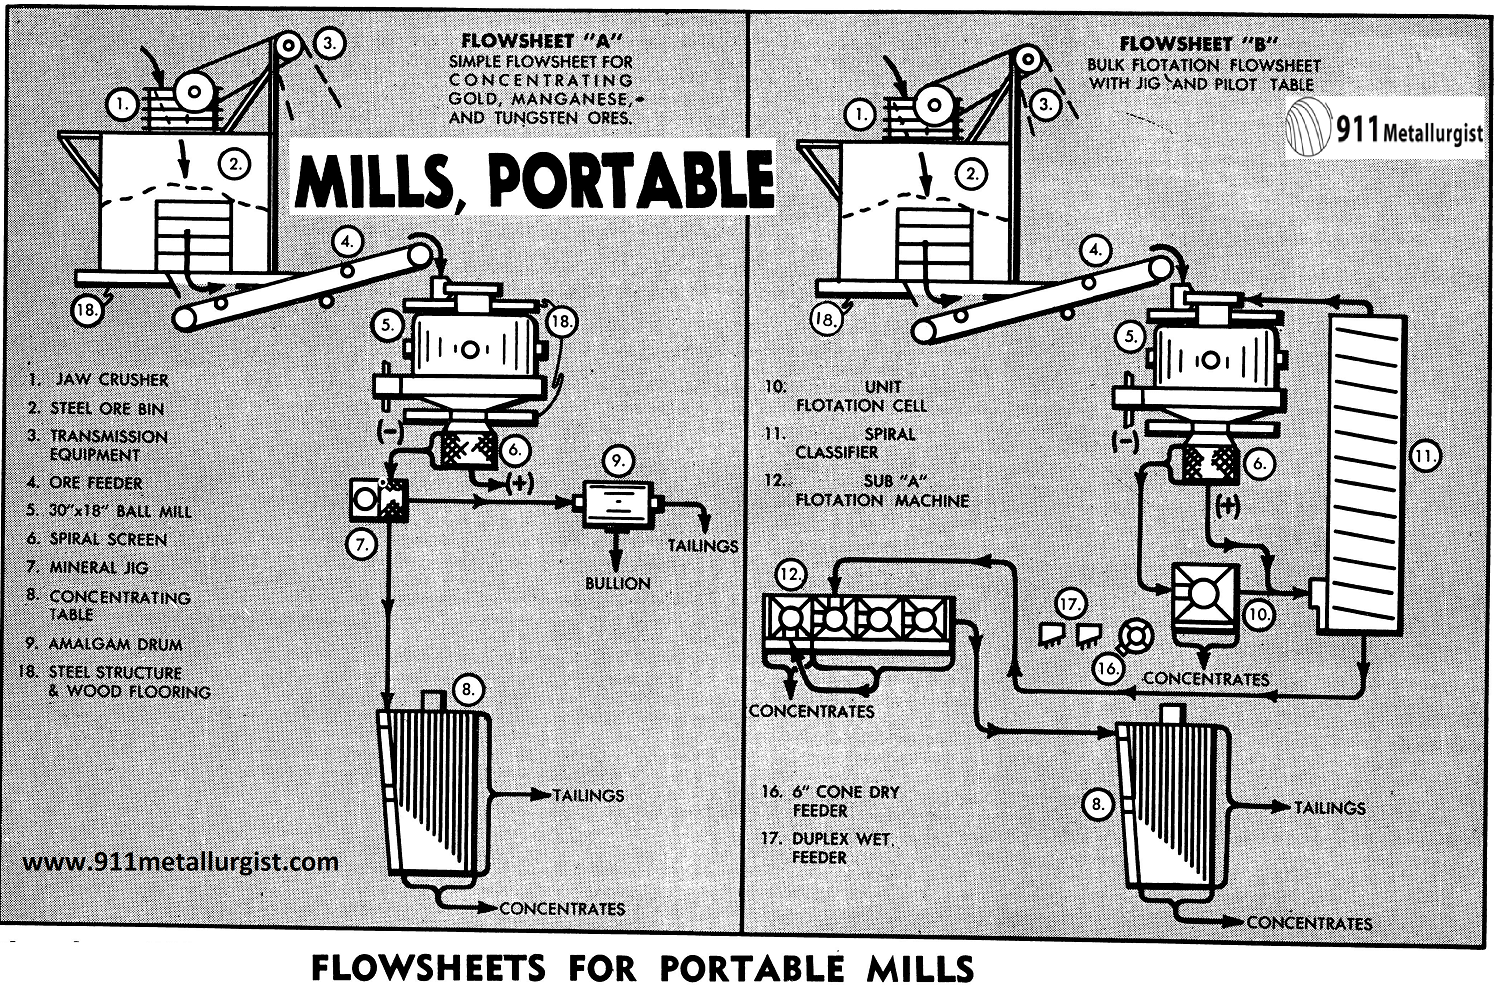 Flowsheets for Portable Mills